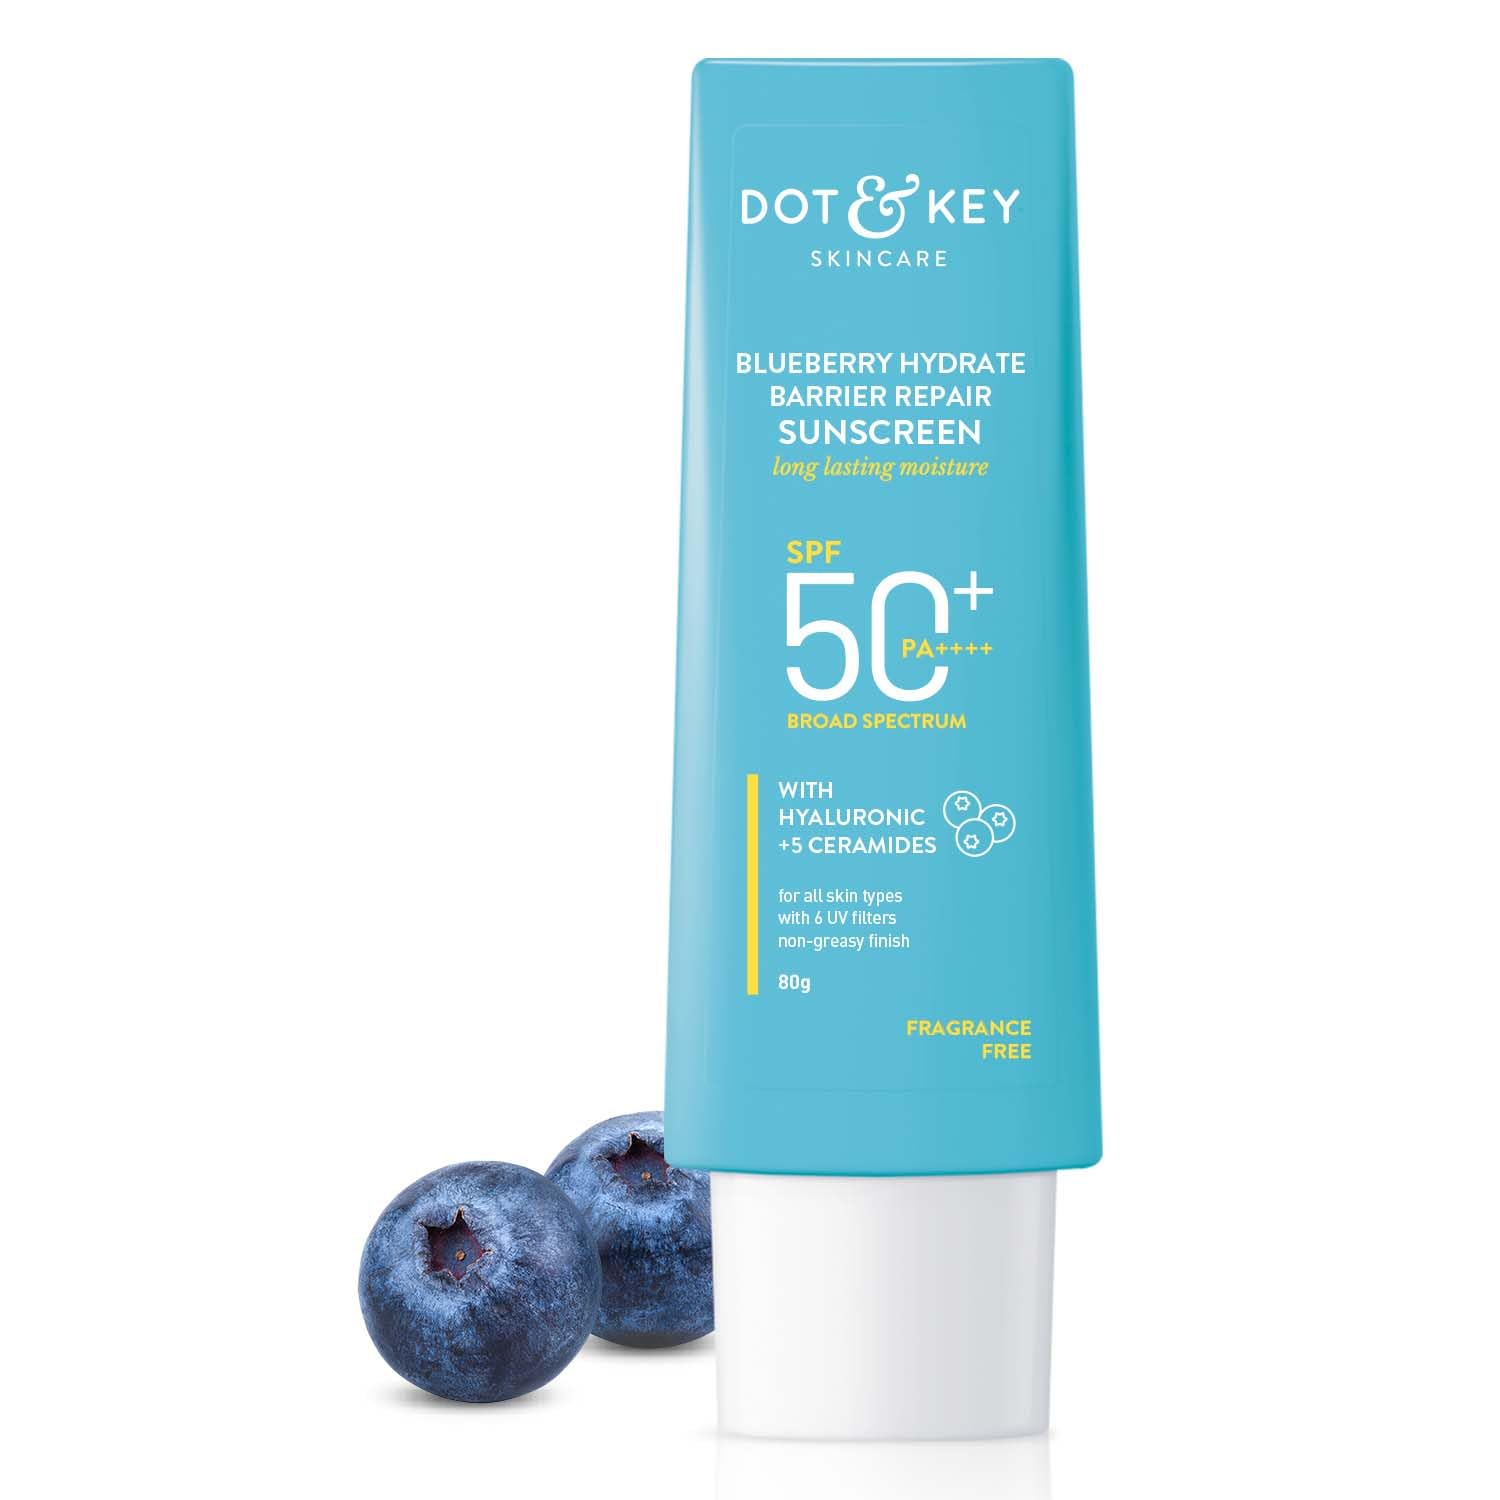 Product Review: Dot & Key Blueberry Hydrate Barrier Repair Sunscreen SPF 50  For Dry & Sensitive Skin